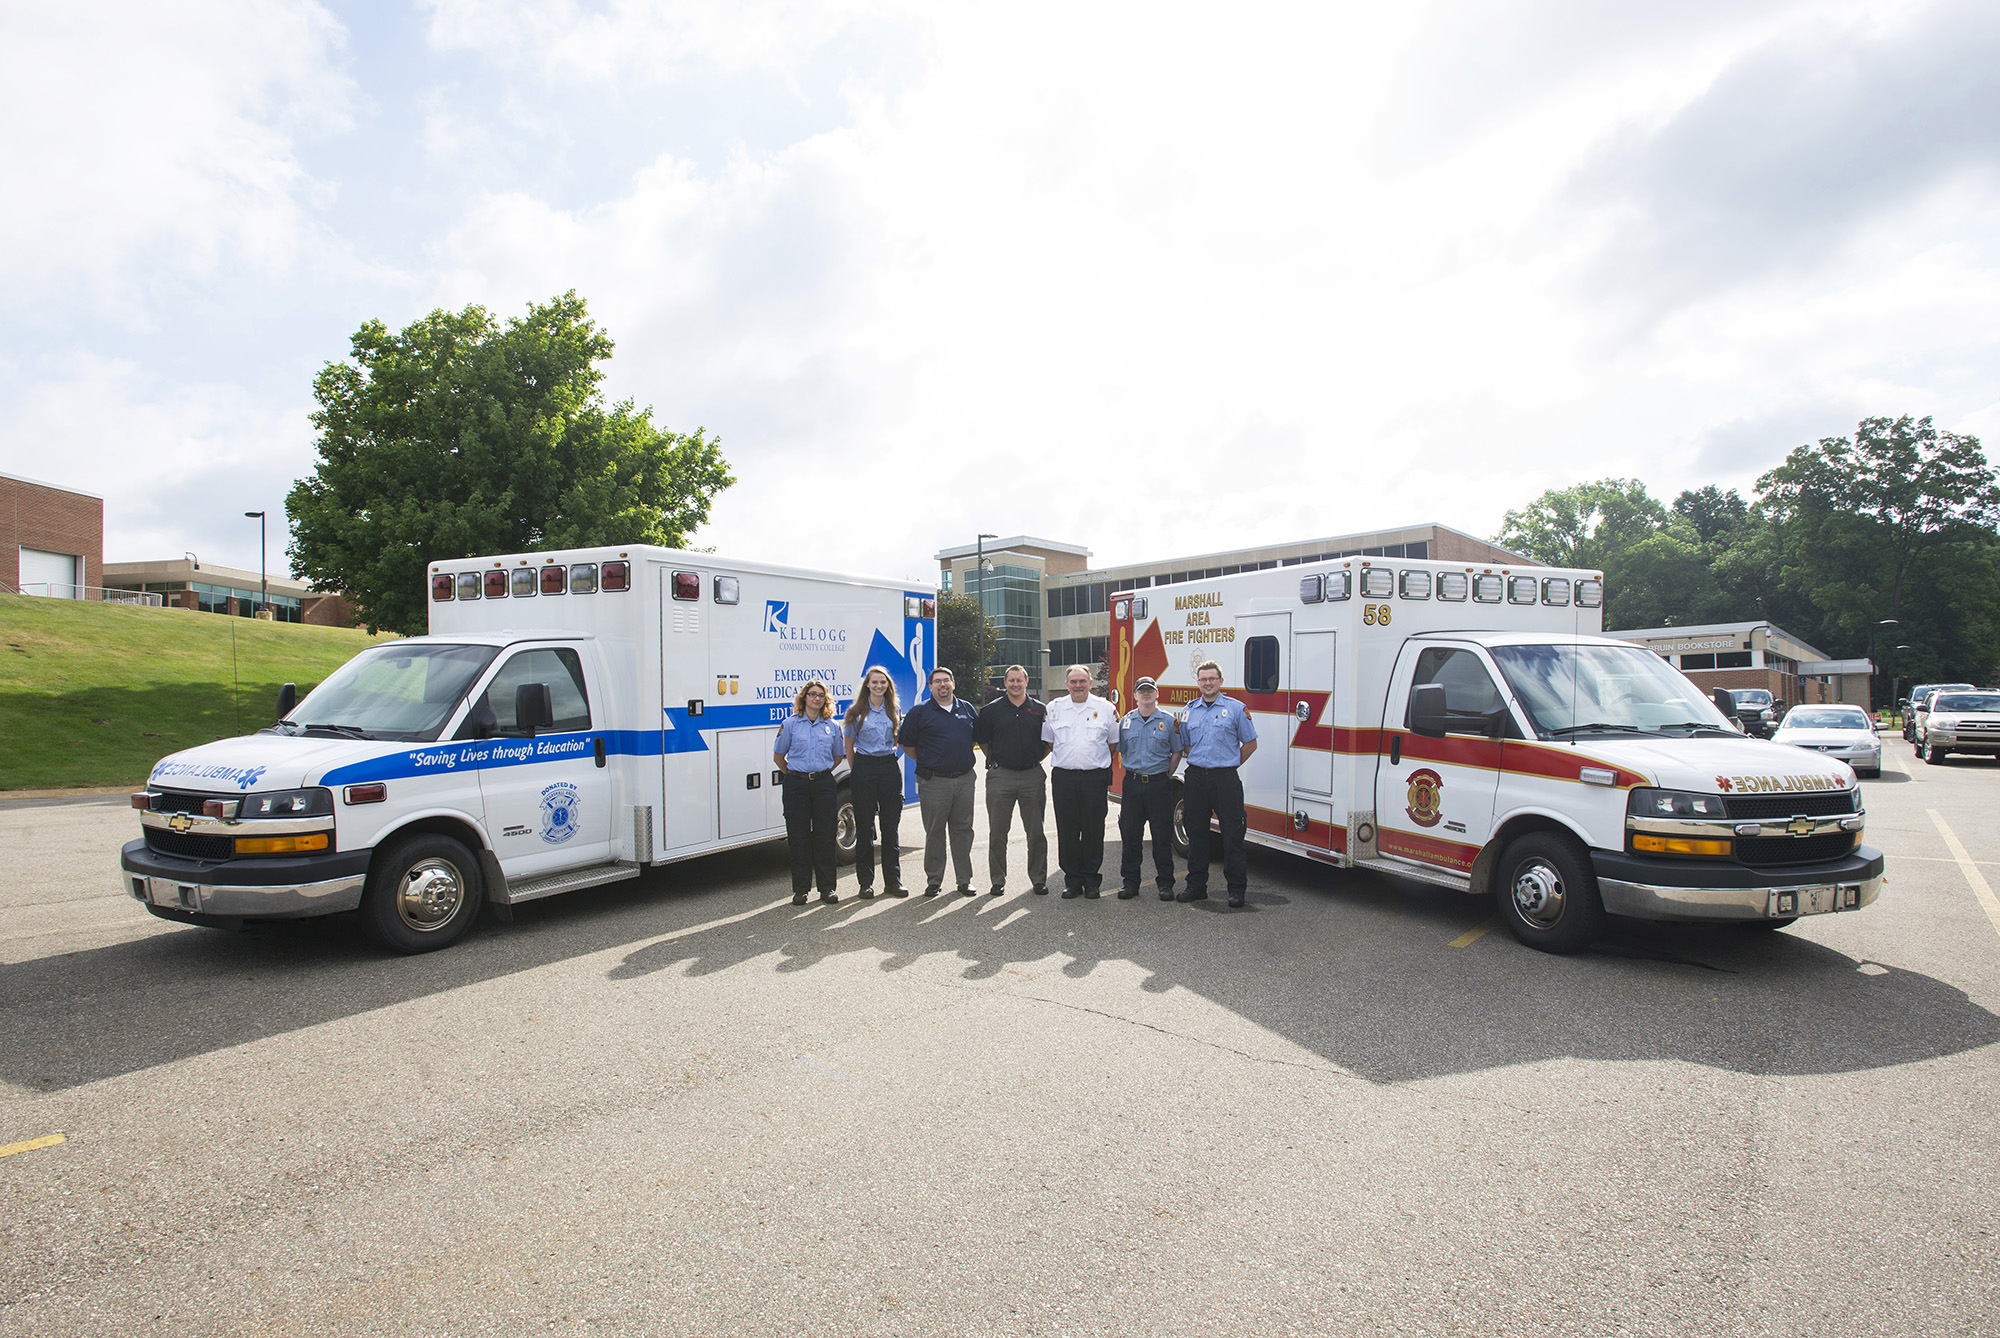 Pictured are KCC and MAFFAA officials with the donated and newly refurbished ambulance on the left. From left to right are MAFFAA Basic EMTs Kristen Jaskiw and Abigail Sanger, KCC EMS Education Faculty Coordinator Clark Imus, KCC Public Safety Education Director Rob Miller, MAFFAA Executive Director Mark Burke, MAFFAA Operations Manager Nick Smith and MAFFAA Basic EMT Josh Turner.